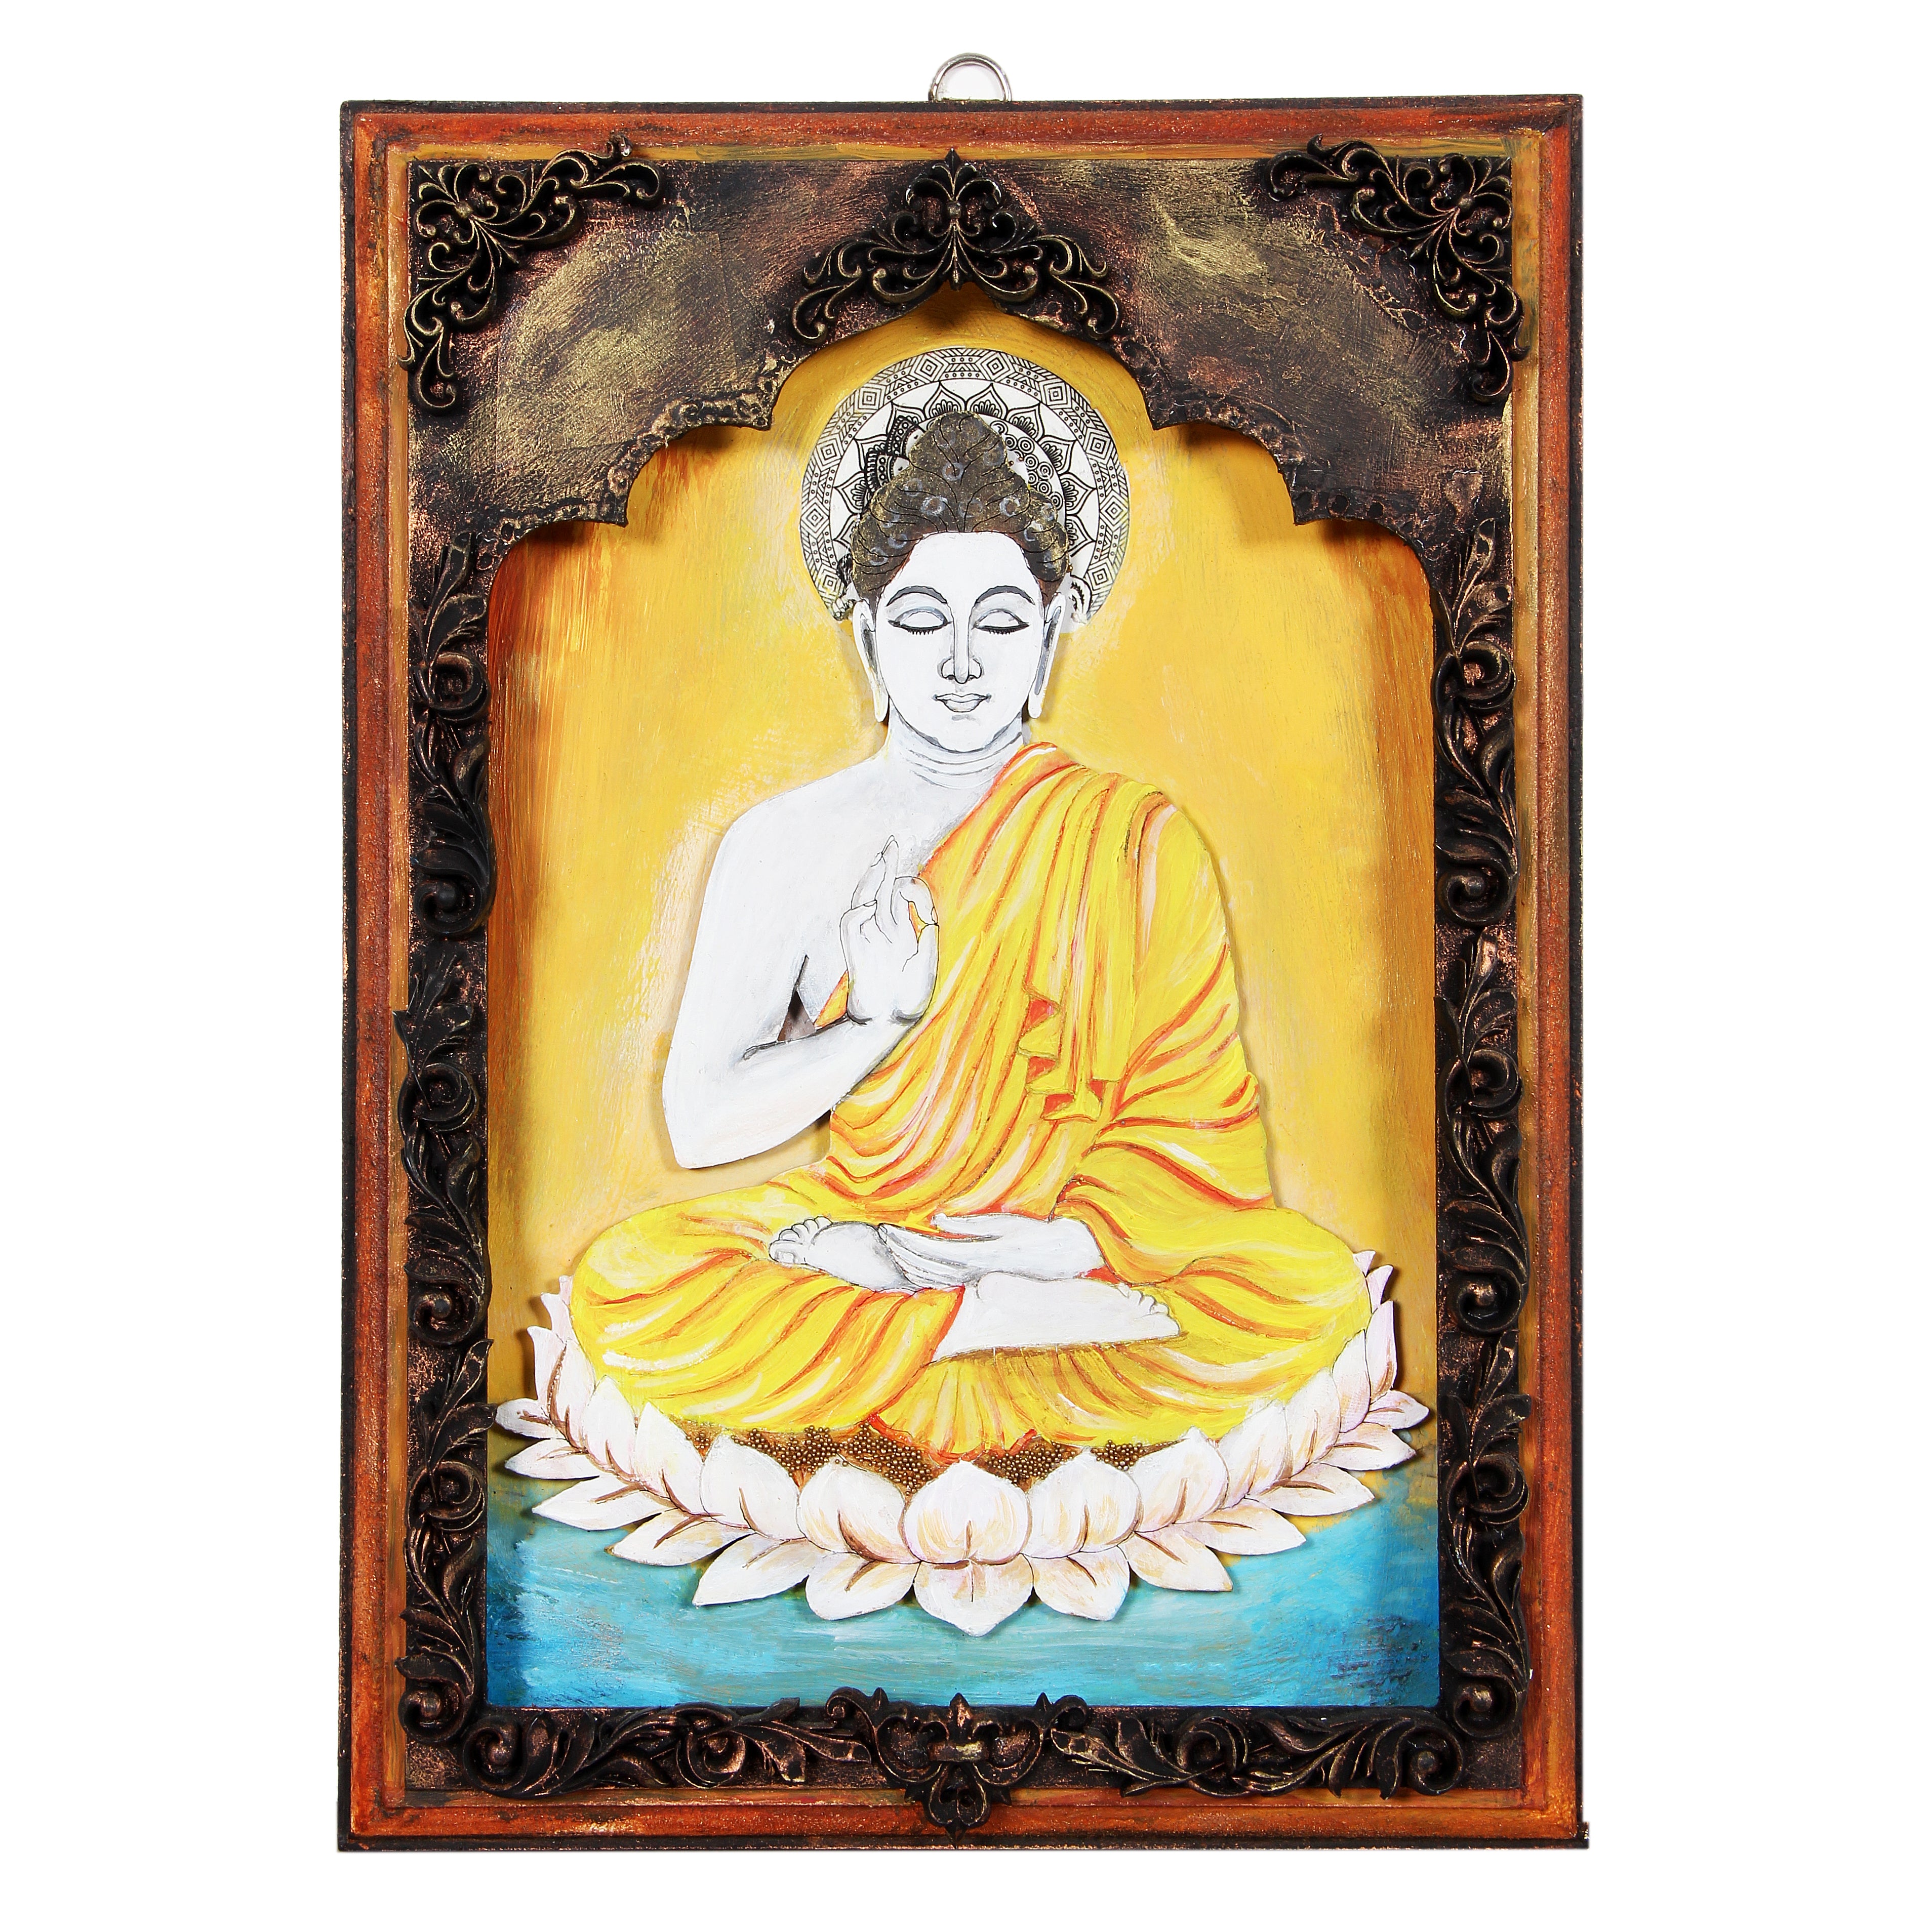 Mdf Pre Marked Buddha With D Ring Hanging Hook 12 X 8.5Inch 1Pc Lb